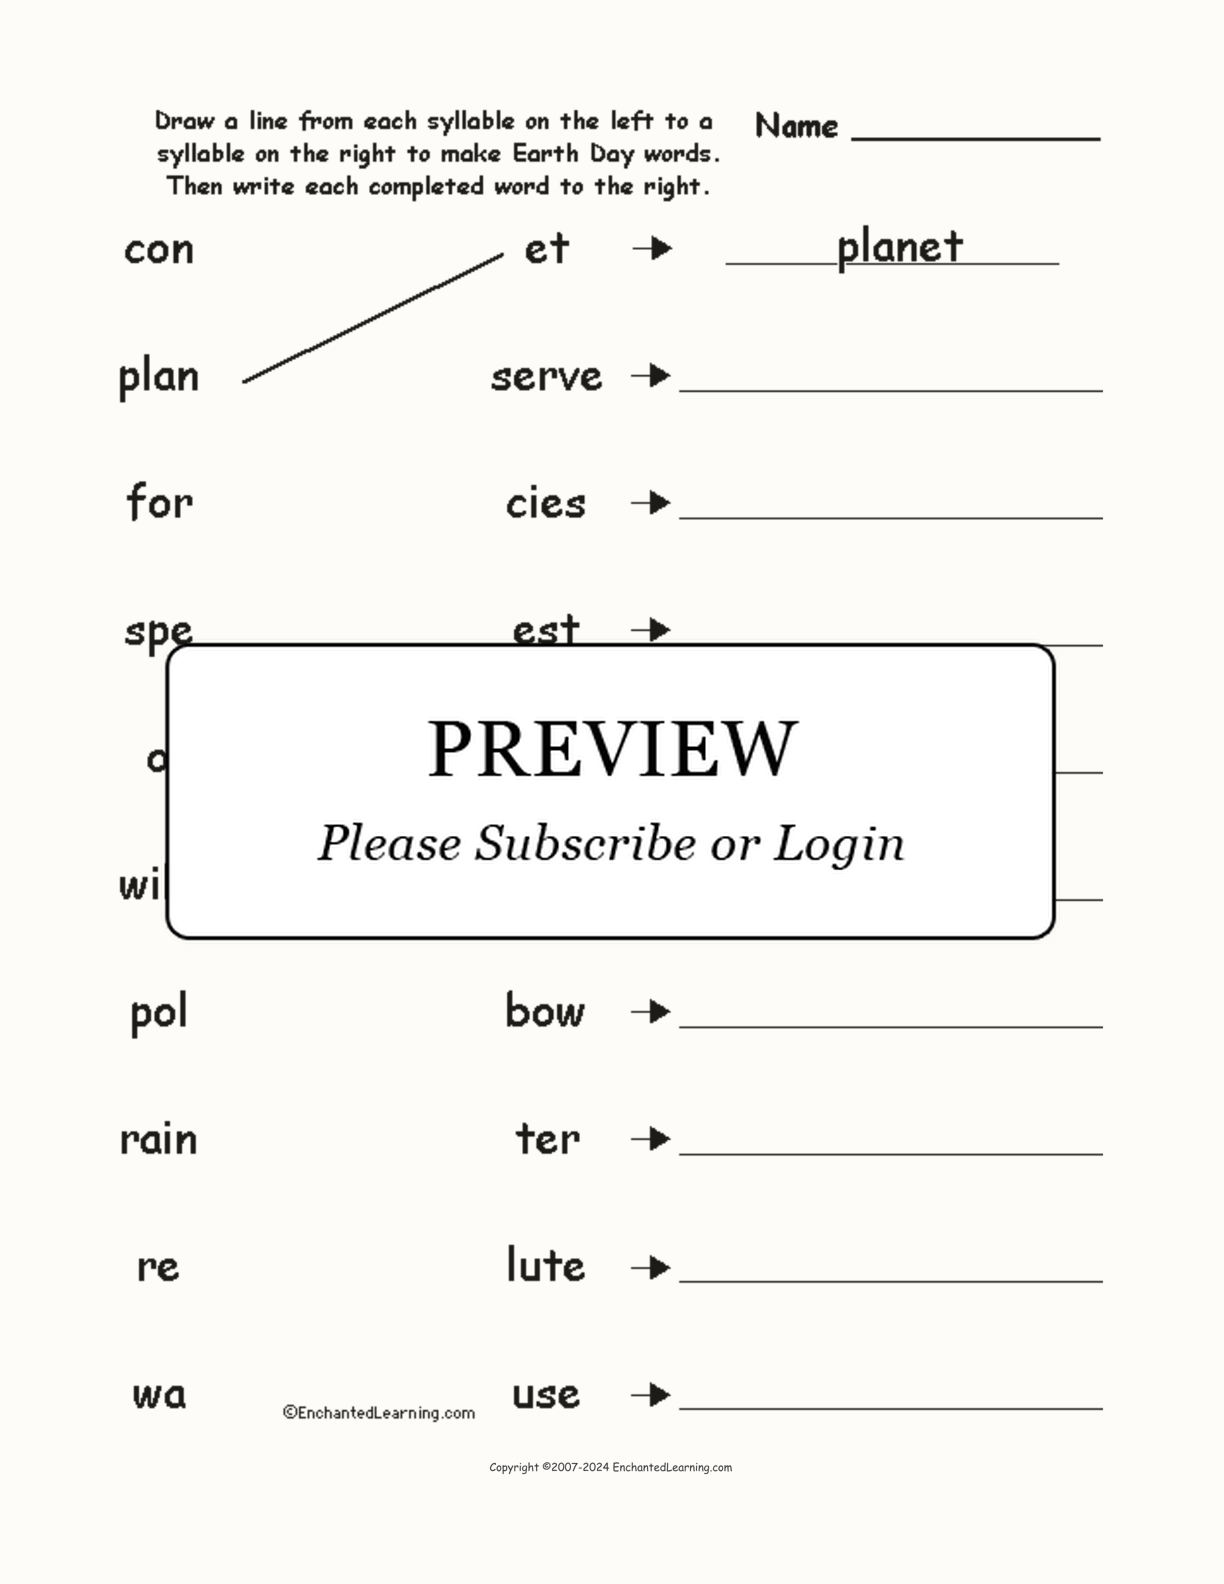 Match the Syllables: Earth Day Words interactive worksheet page 1